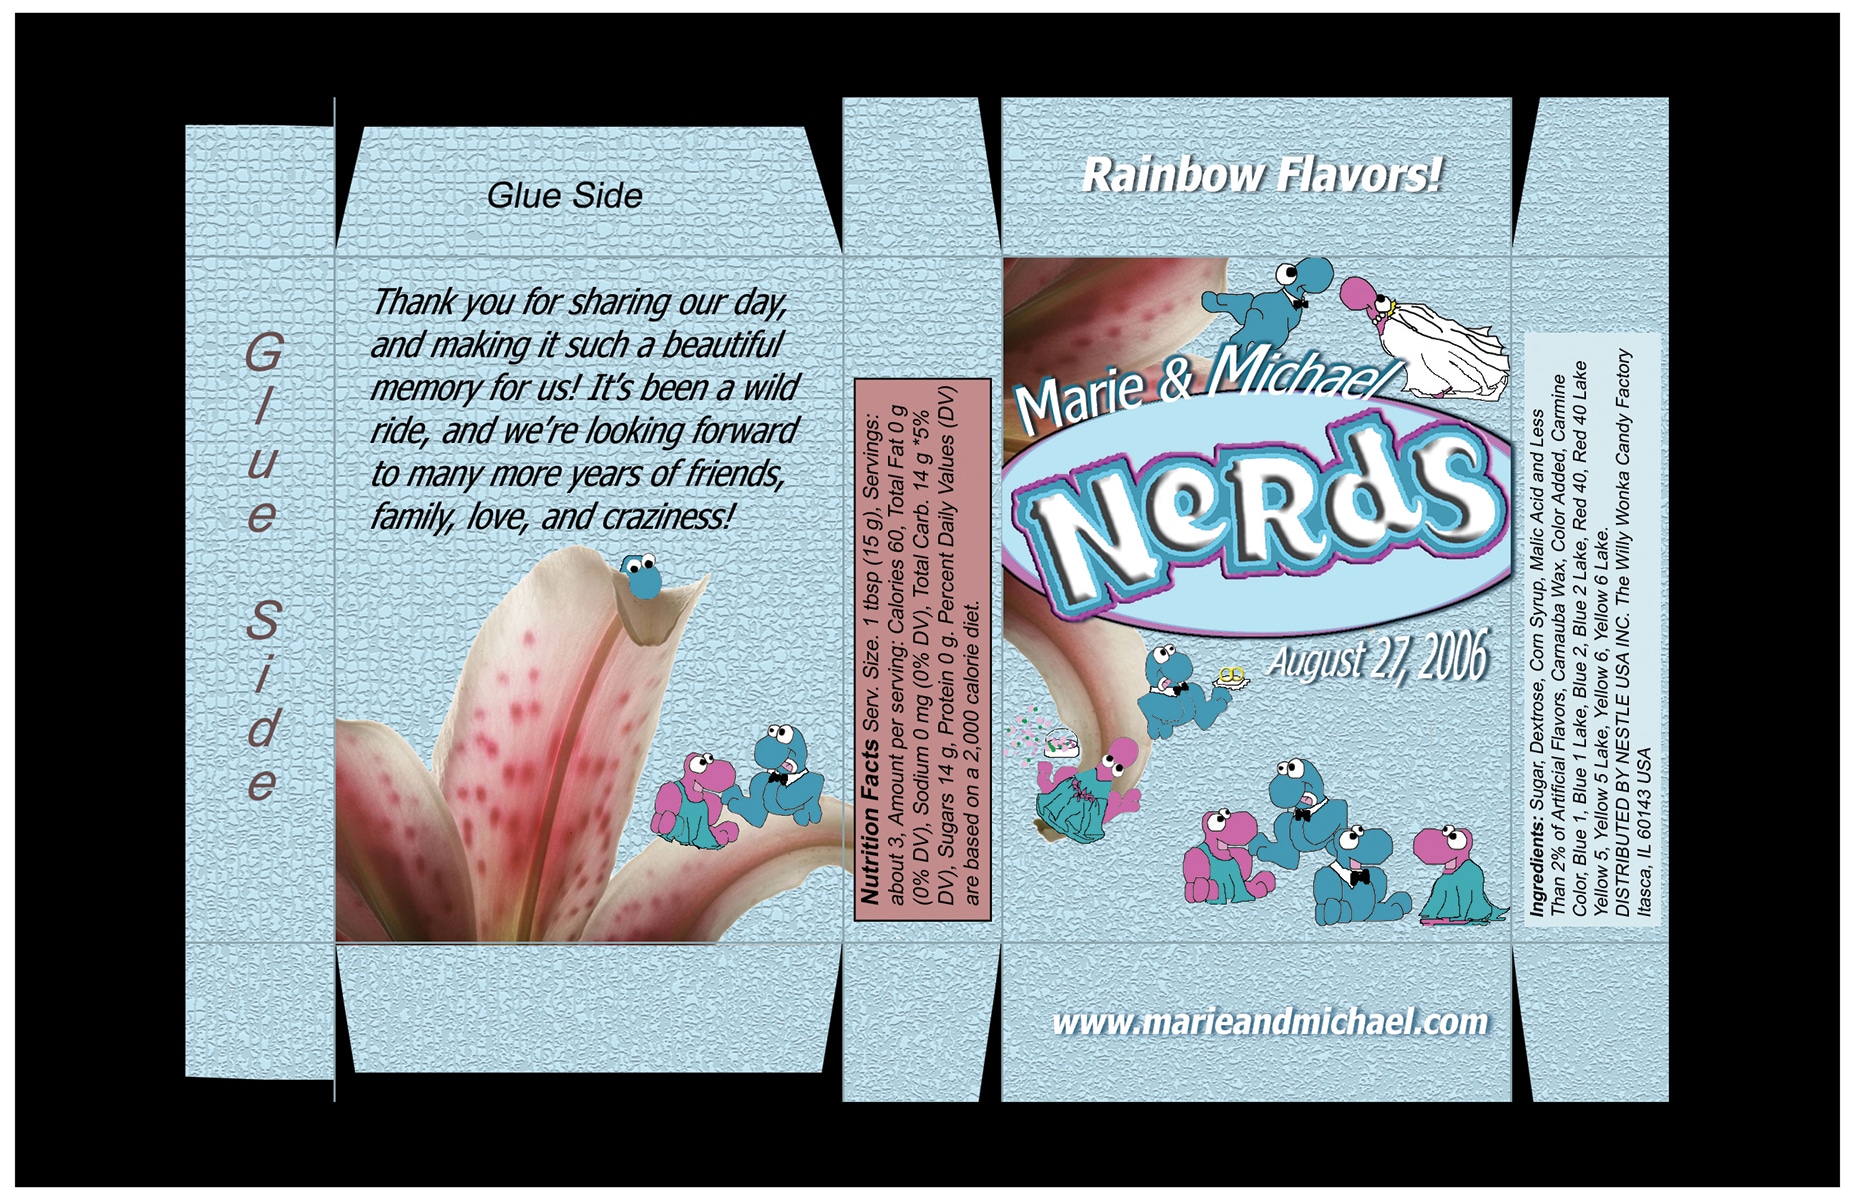 A computer rendering of a flattened out Nerds candy box. It's light blue, with pink and teal accents.